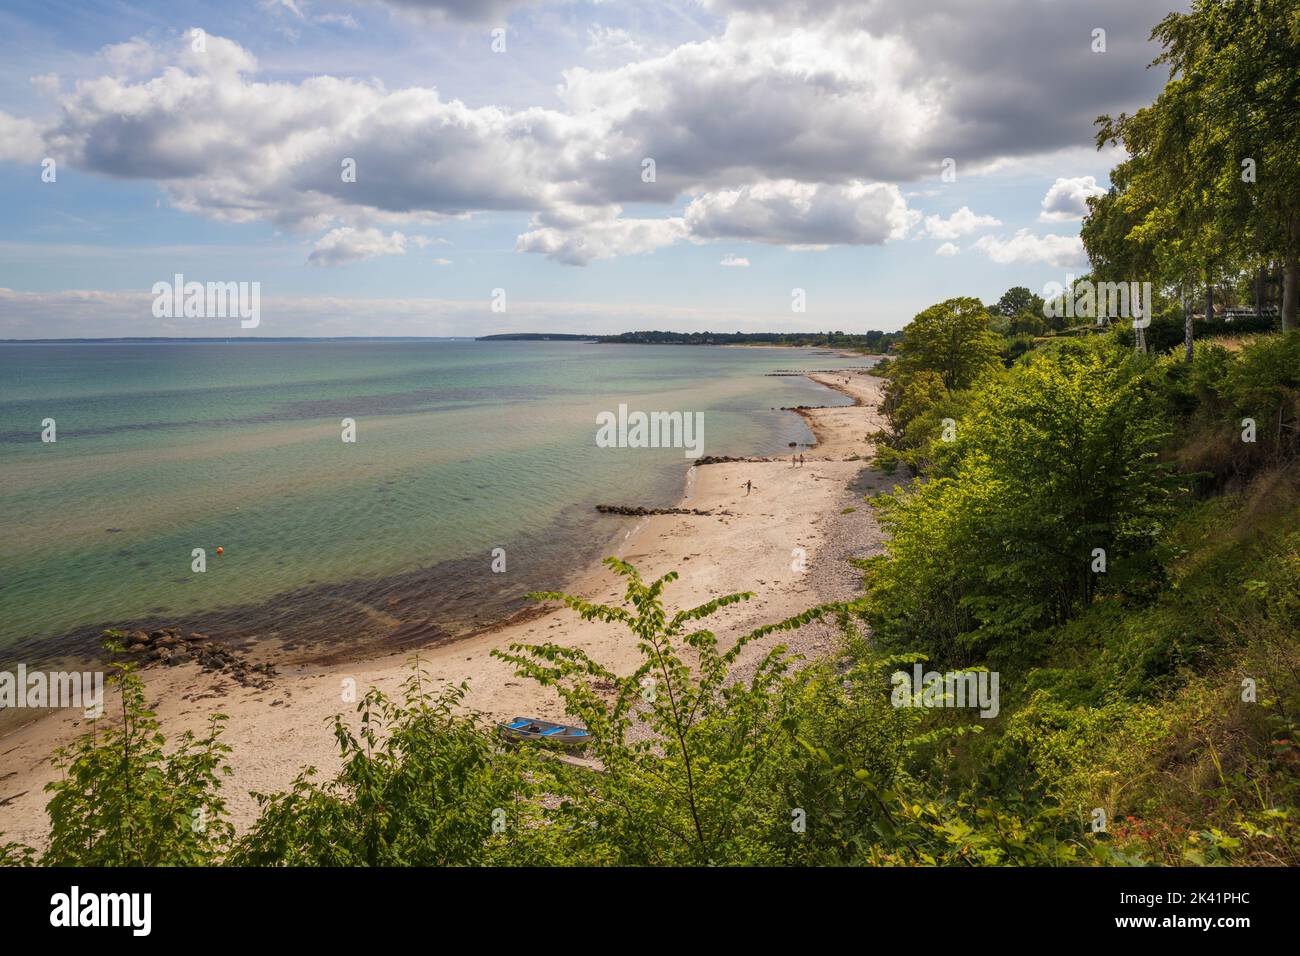 View along empty beach at Munkerup looking towards Dronningmolle, Munkerup, Zealand, Denmark, Europe Stock Photo